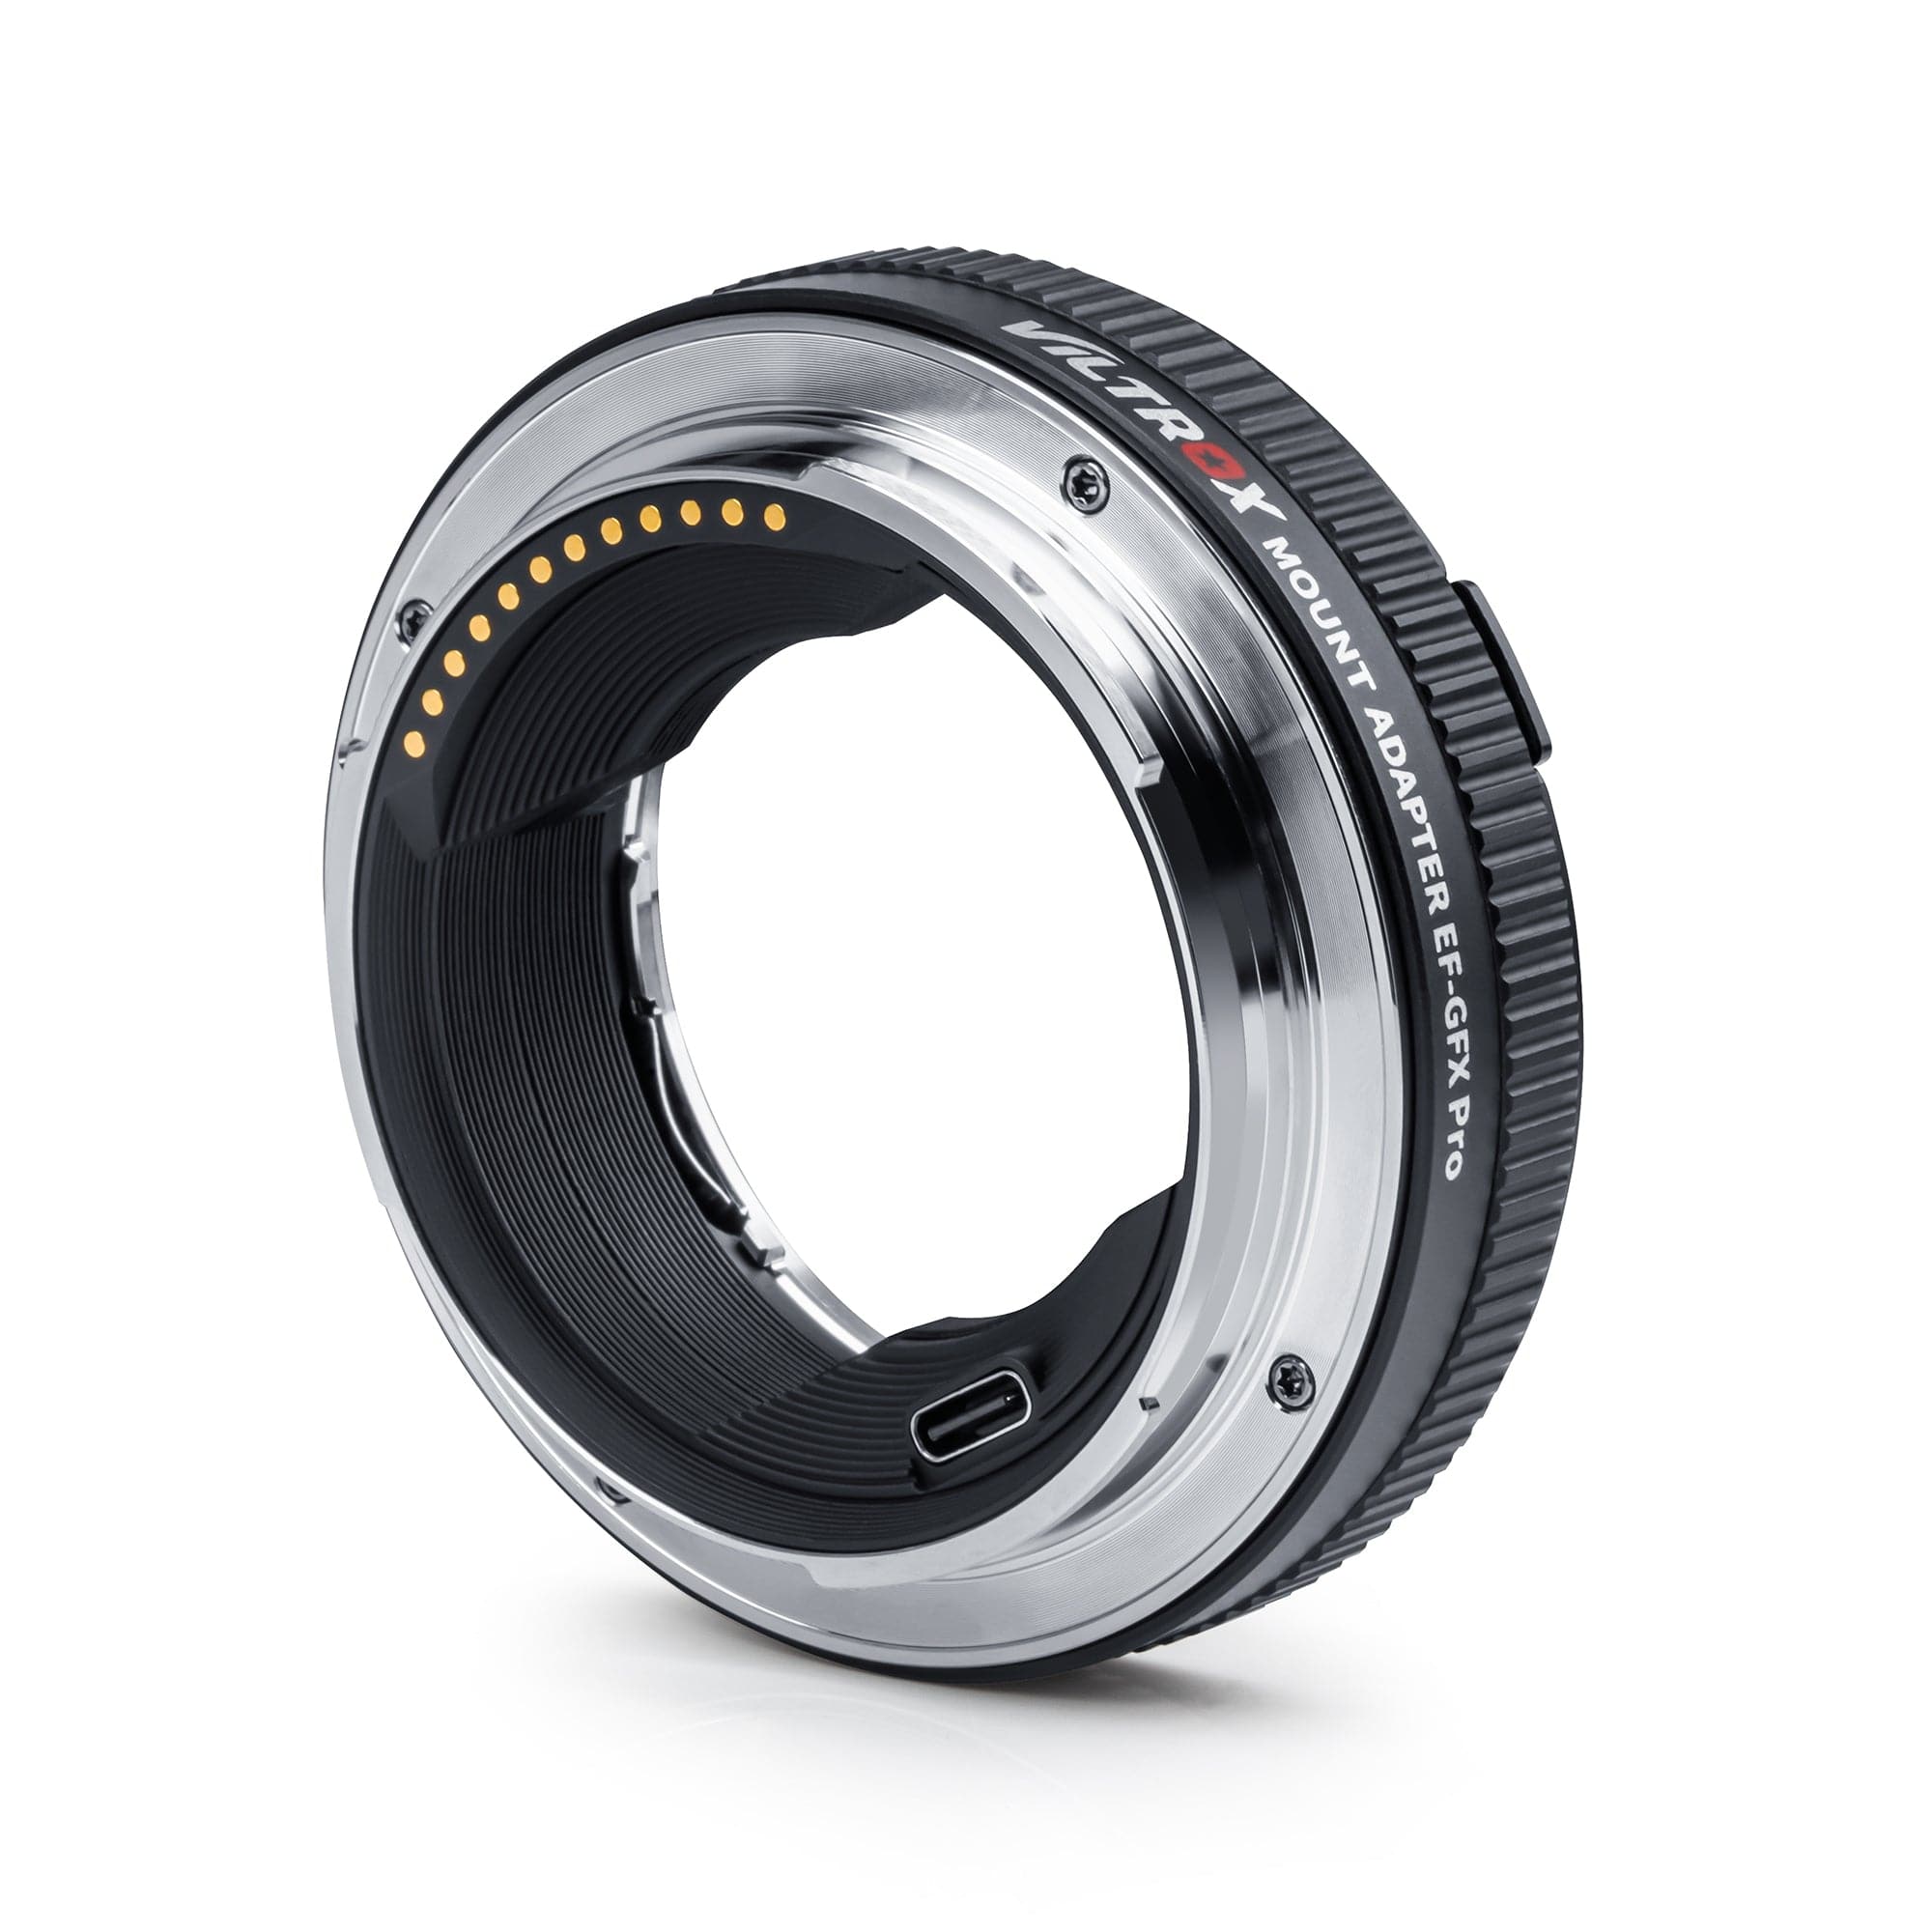 Viltrox EF-GFX/GFX Pro adapter is designed for Canon EF/EF-S series lens to  Fuji GFX-mount med-format cameras such as GFX 50S/GFX 50R